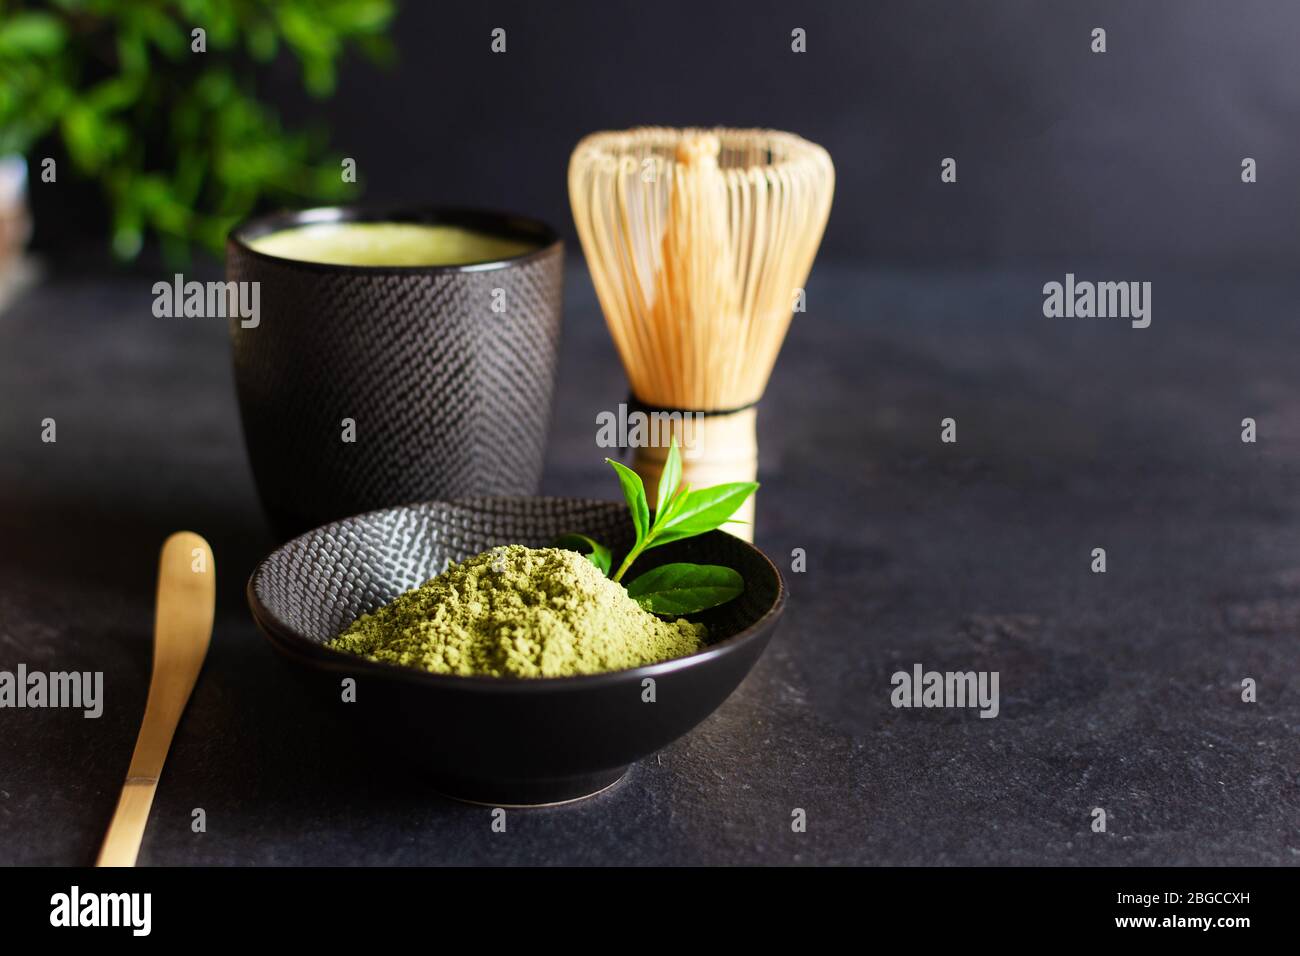 Organic green matcha tea and tea accessories on black background. Japanese tea ceremony concept. Chashaku spoon and chasen bamboo whisk for brewing ma Stock Photo